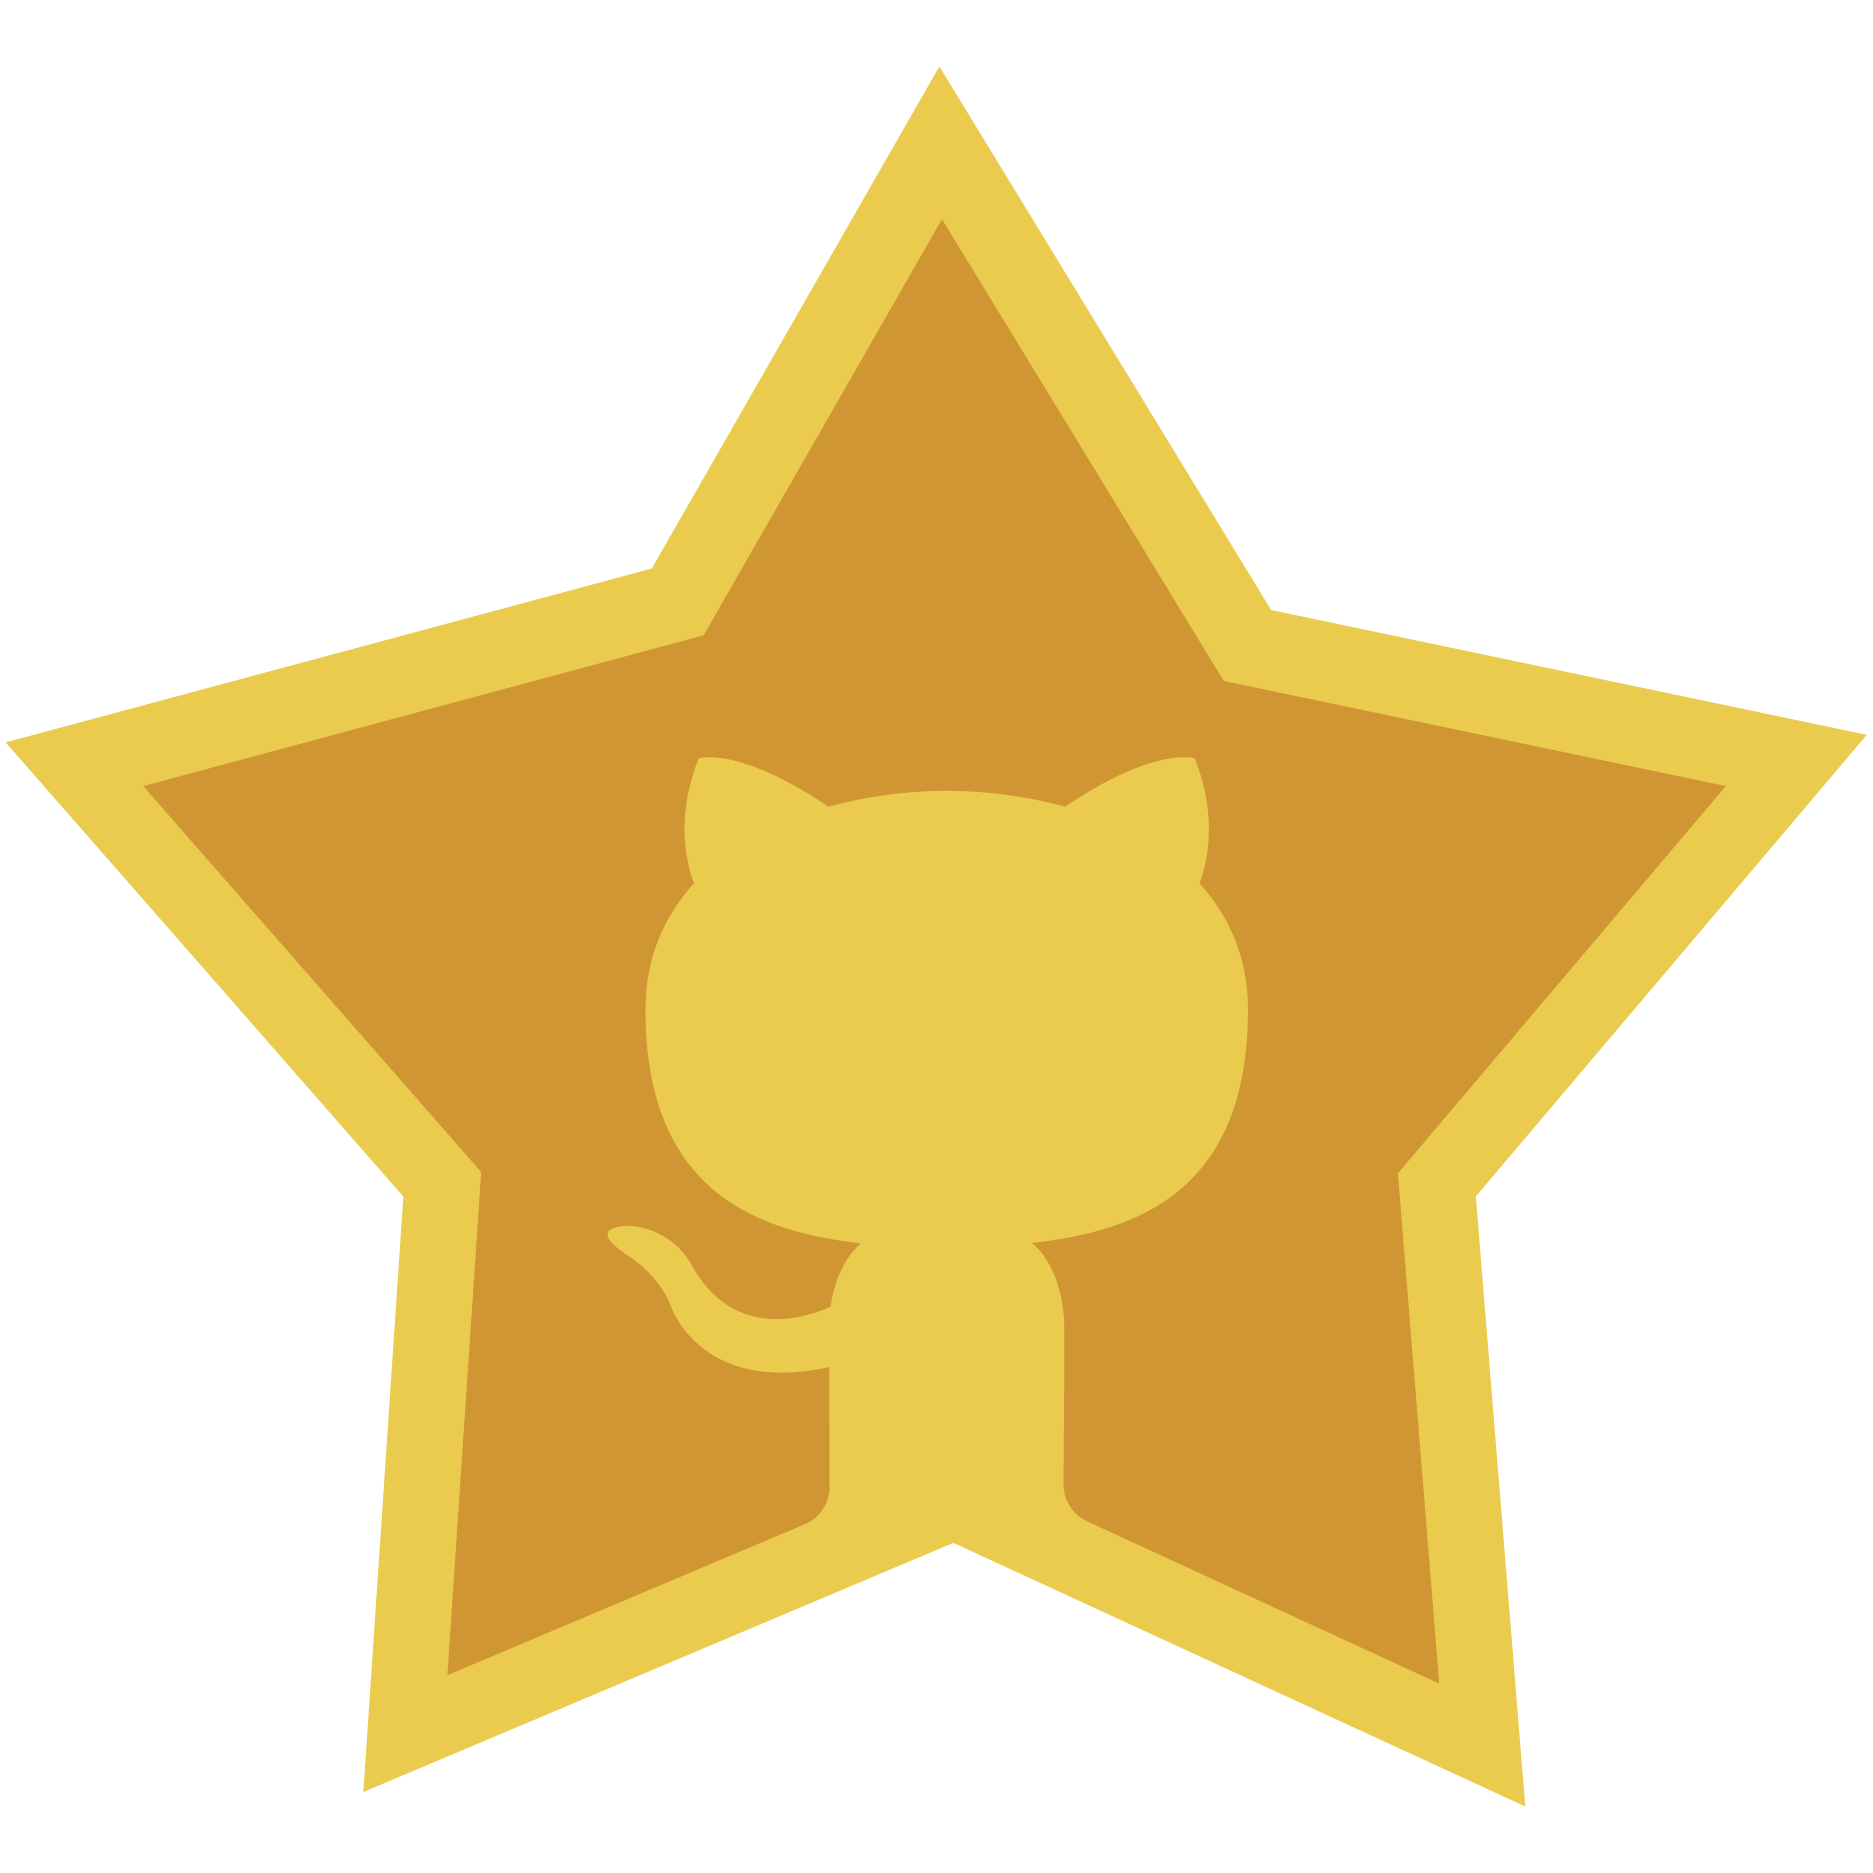 An image of a large gold star with GitHub logo inside